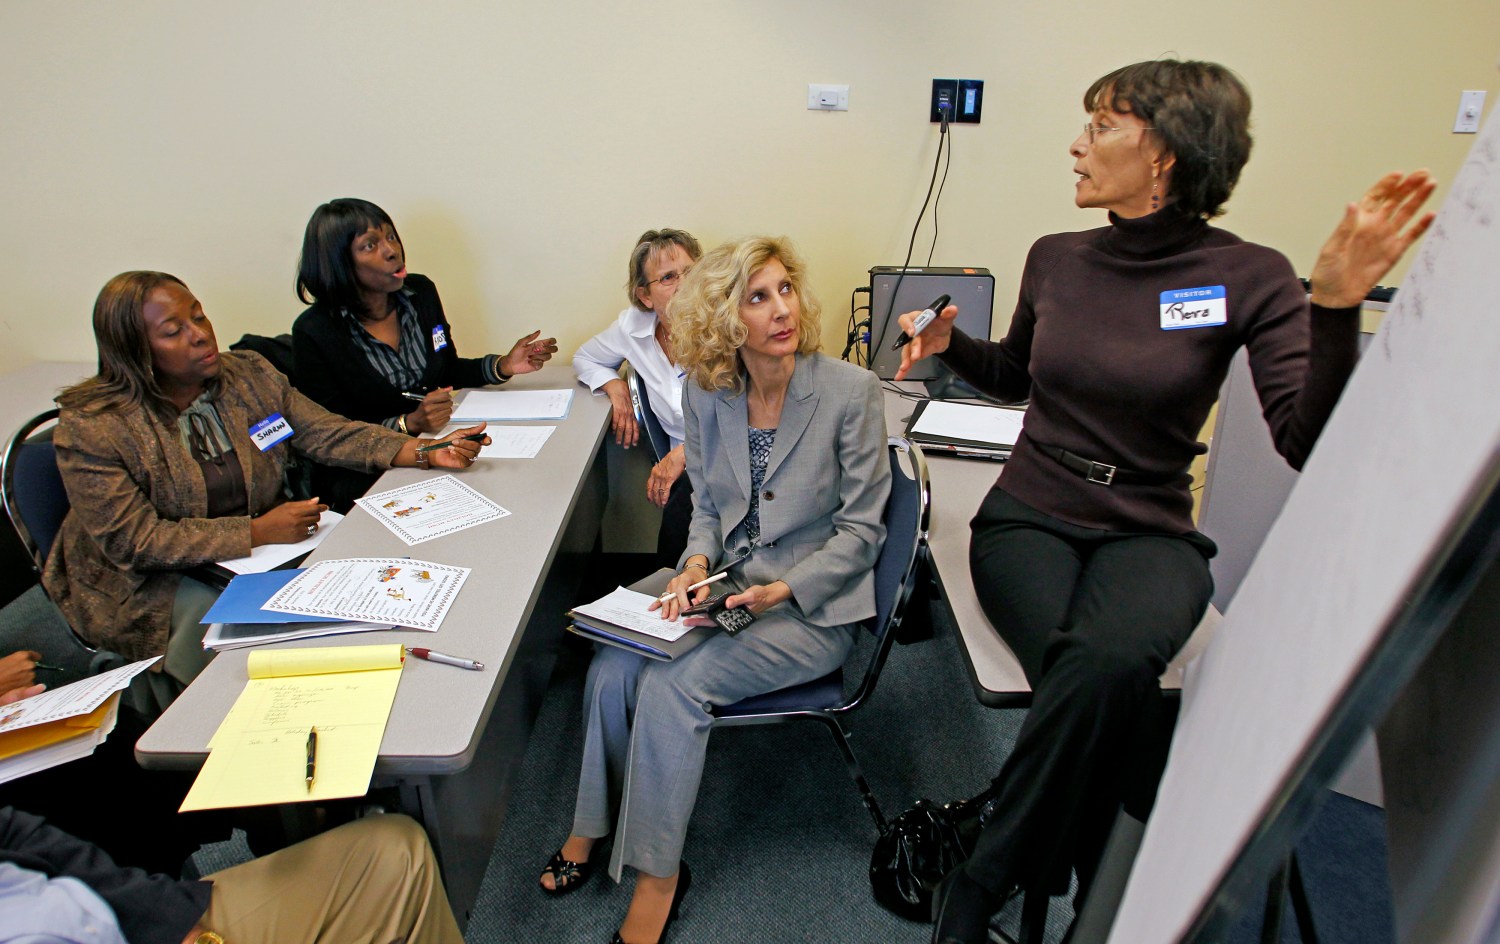 Job seekers take part in a professional placement network focus group exercise at the Workforce Alliance Career Center in West Palm Beach, Florida December 2, 2010. The November 2010 employment situation economic indicator numbers will be released early December 3.  REUTERS/Joe Skipper   (UNITED STATES - Tags: BUSINESS EMPLOYMENT SOCIETY) - GM1E6C30HT301